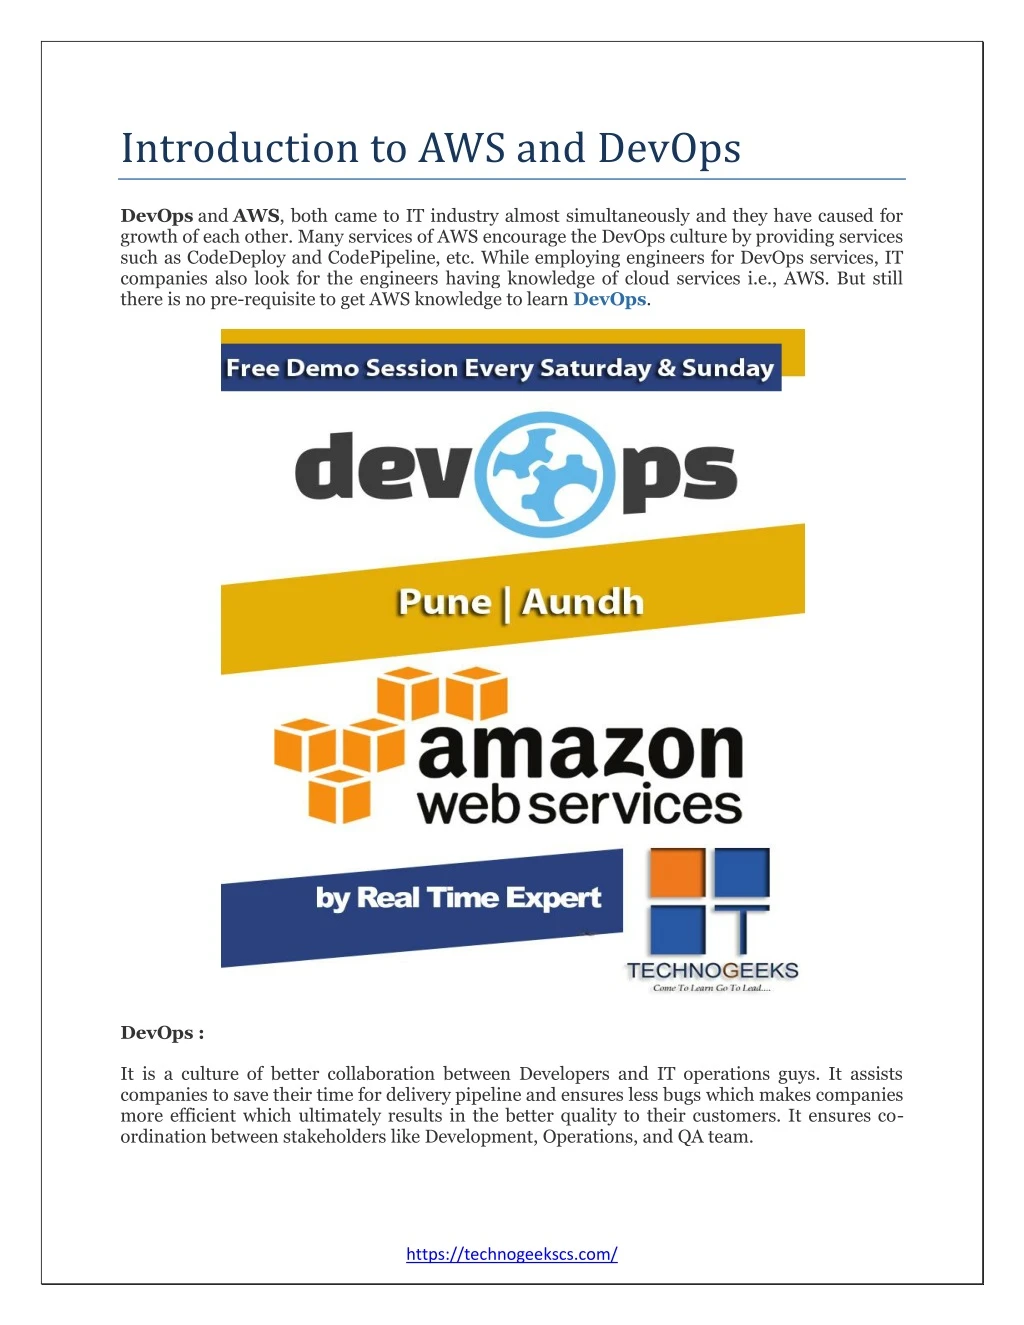 introduction to aws and devops